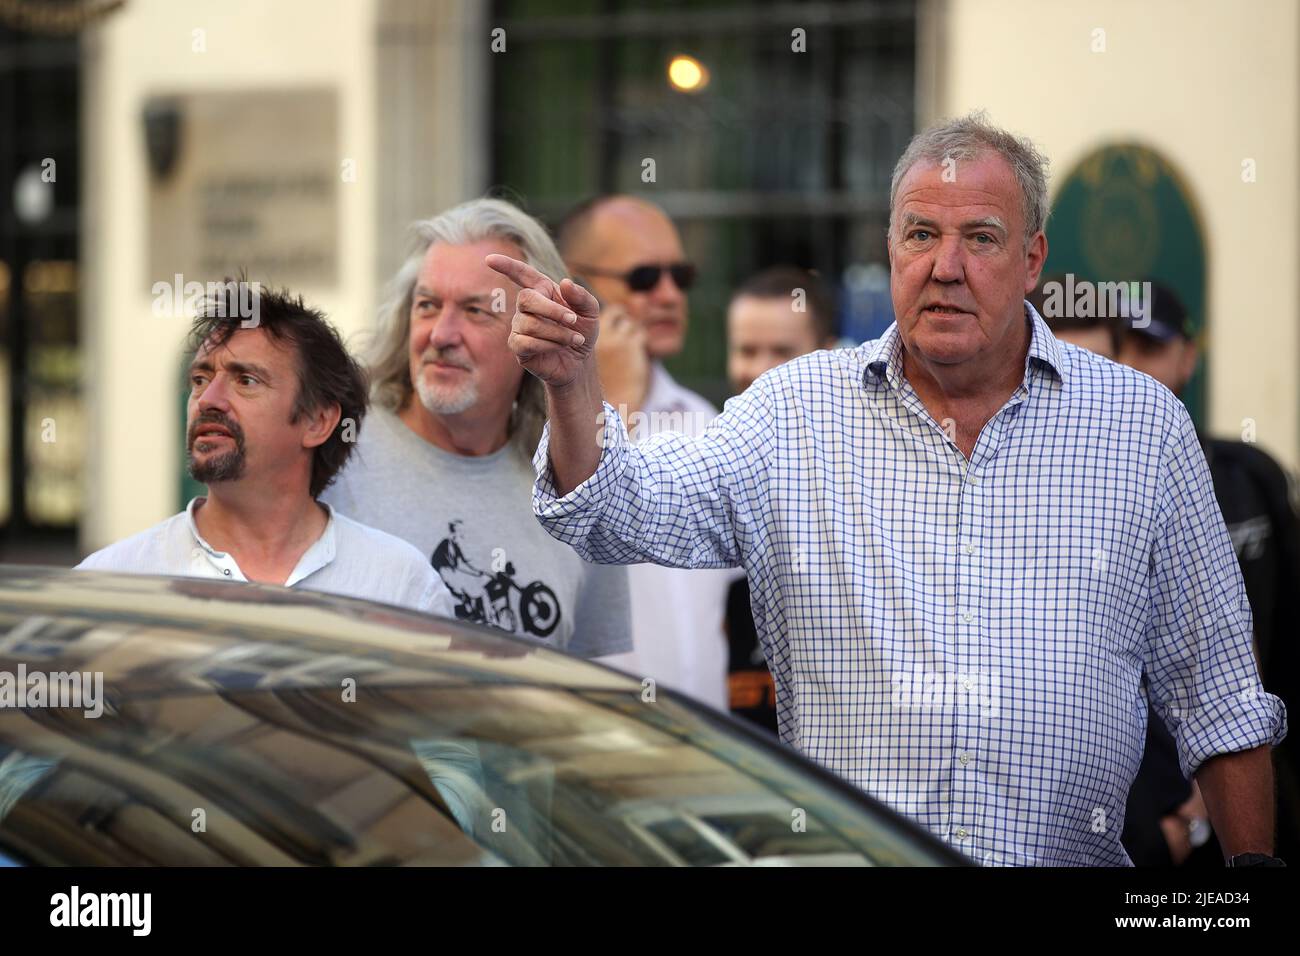 Krakow, Poland. 24th June, 2022. The Grand Tour stars, Jeremy Clarkson, Richard Hammond and James May, visit Cracow, Poland, while on tour the show. The Grand Tour is a British motoring